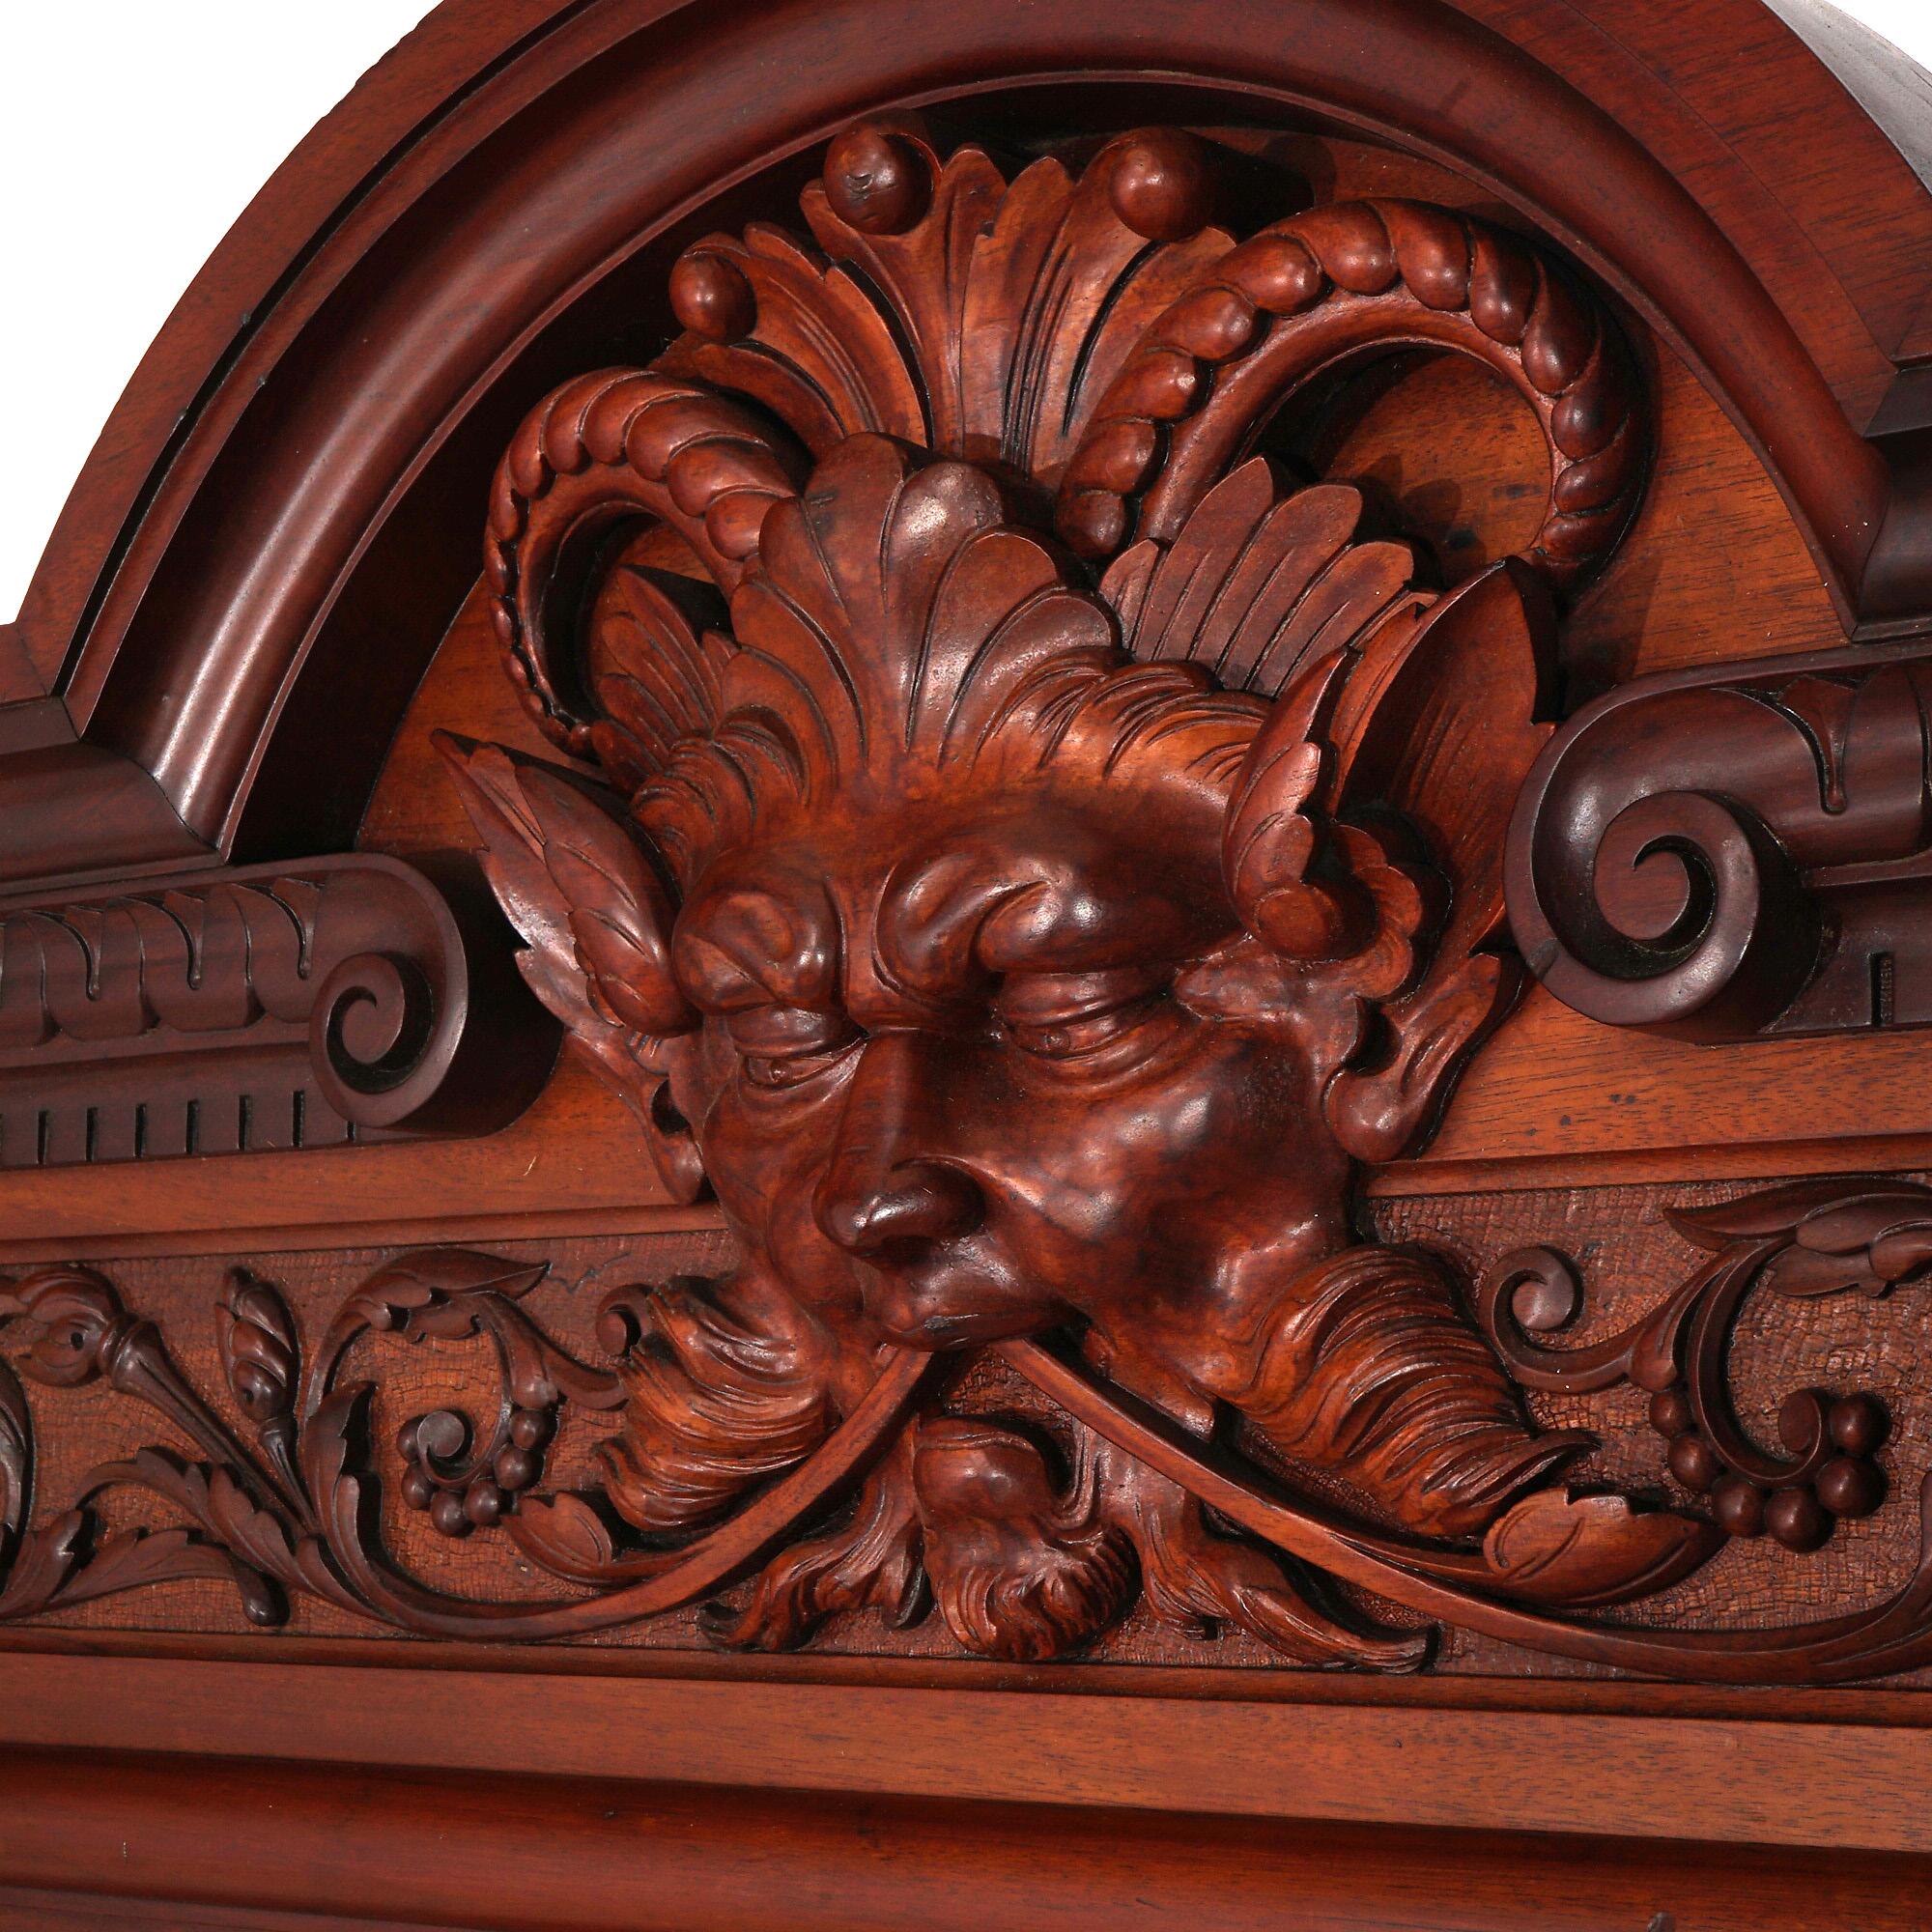 ***Ask About Reduced In-House Shipping Rates - Reliable Service & Fully Insured***
An antique bedroom set in the manner of Horner Brothers offers mahogany paneled construction with carved figural wind god crest, foliate elements and marble top